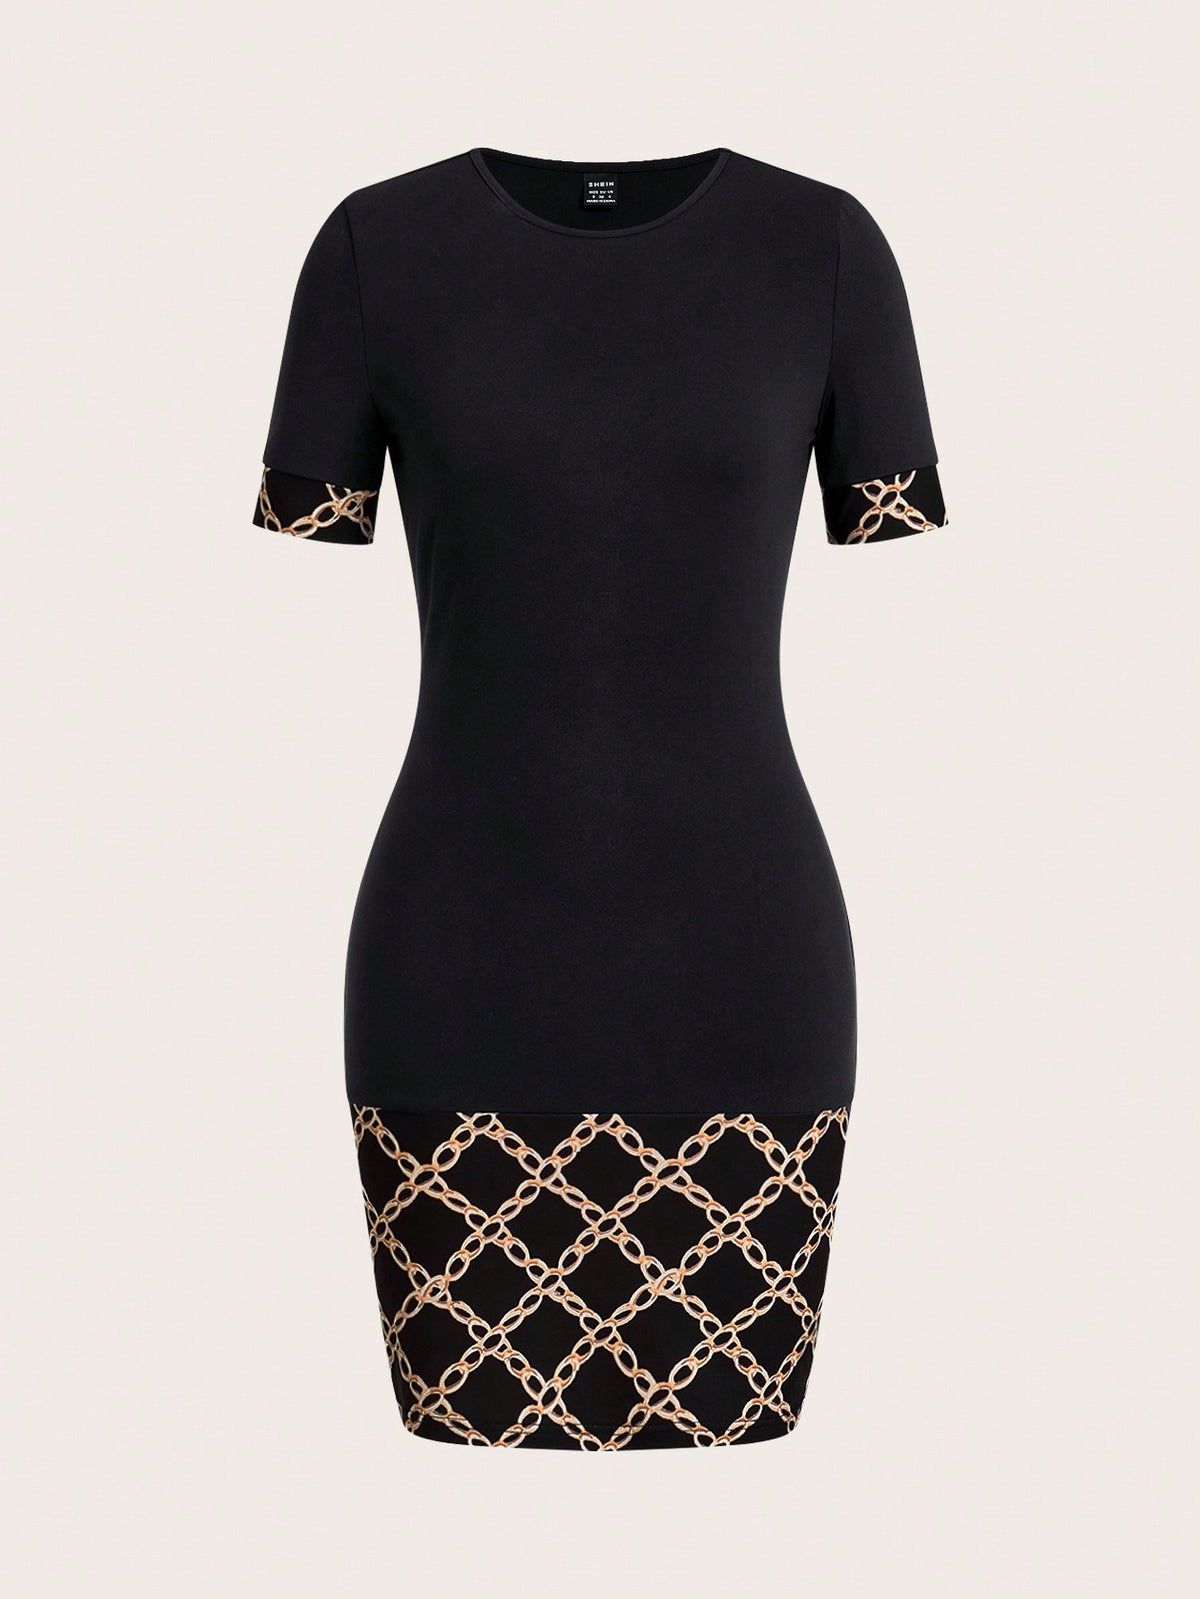 Chain Printed Spliced Slimming Bodycon Dress For Women